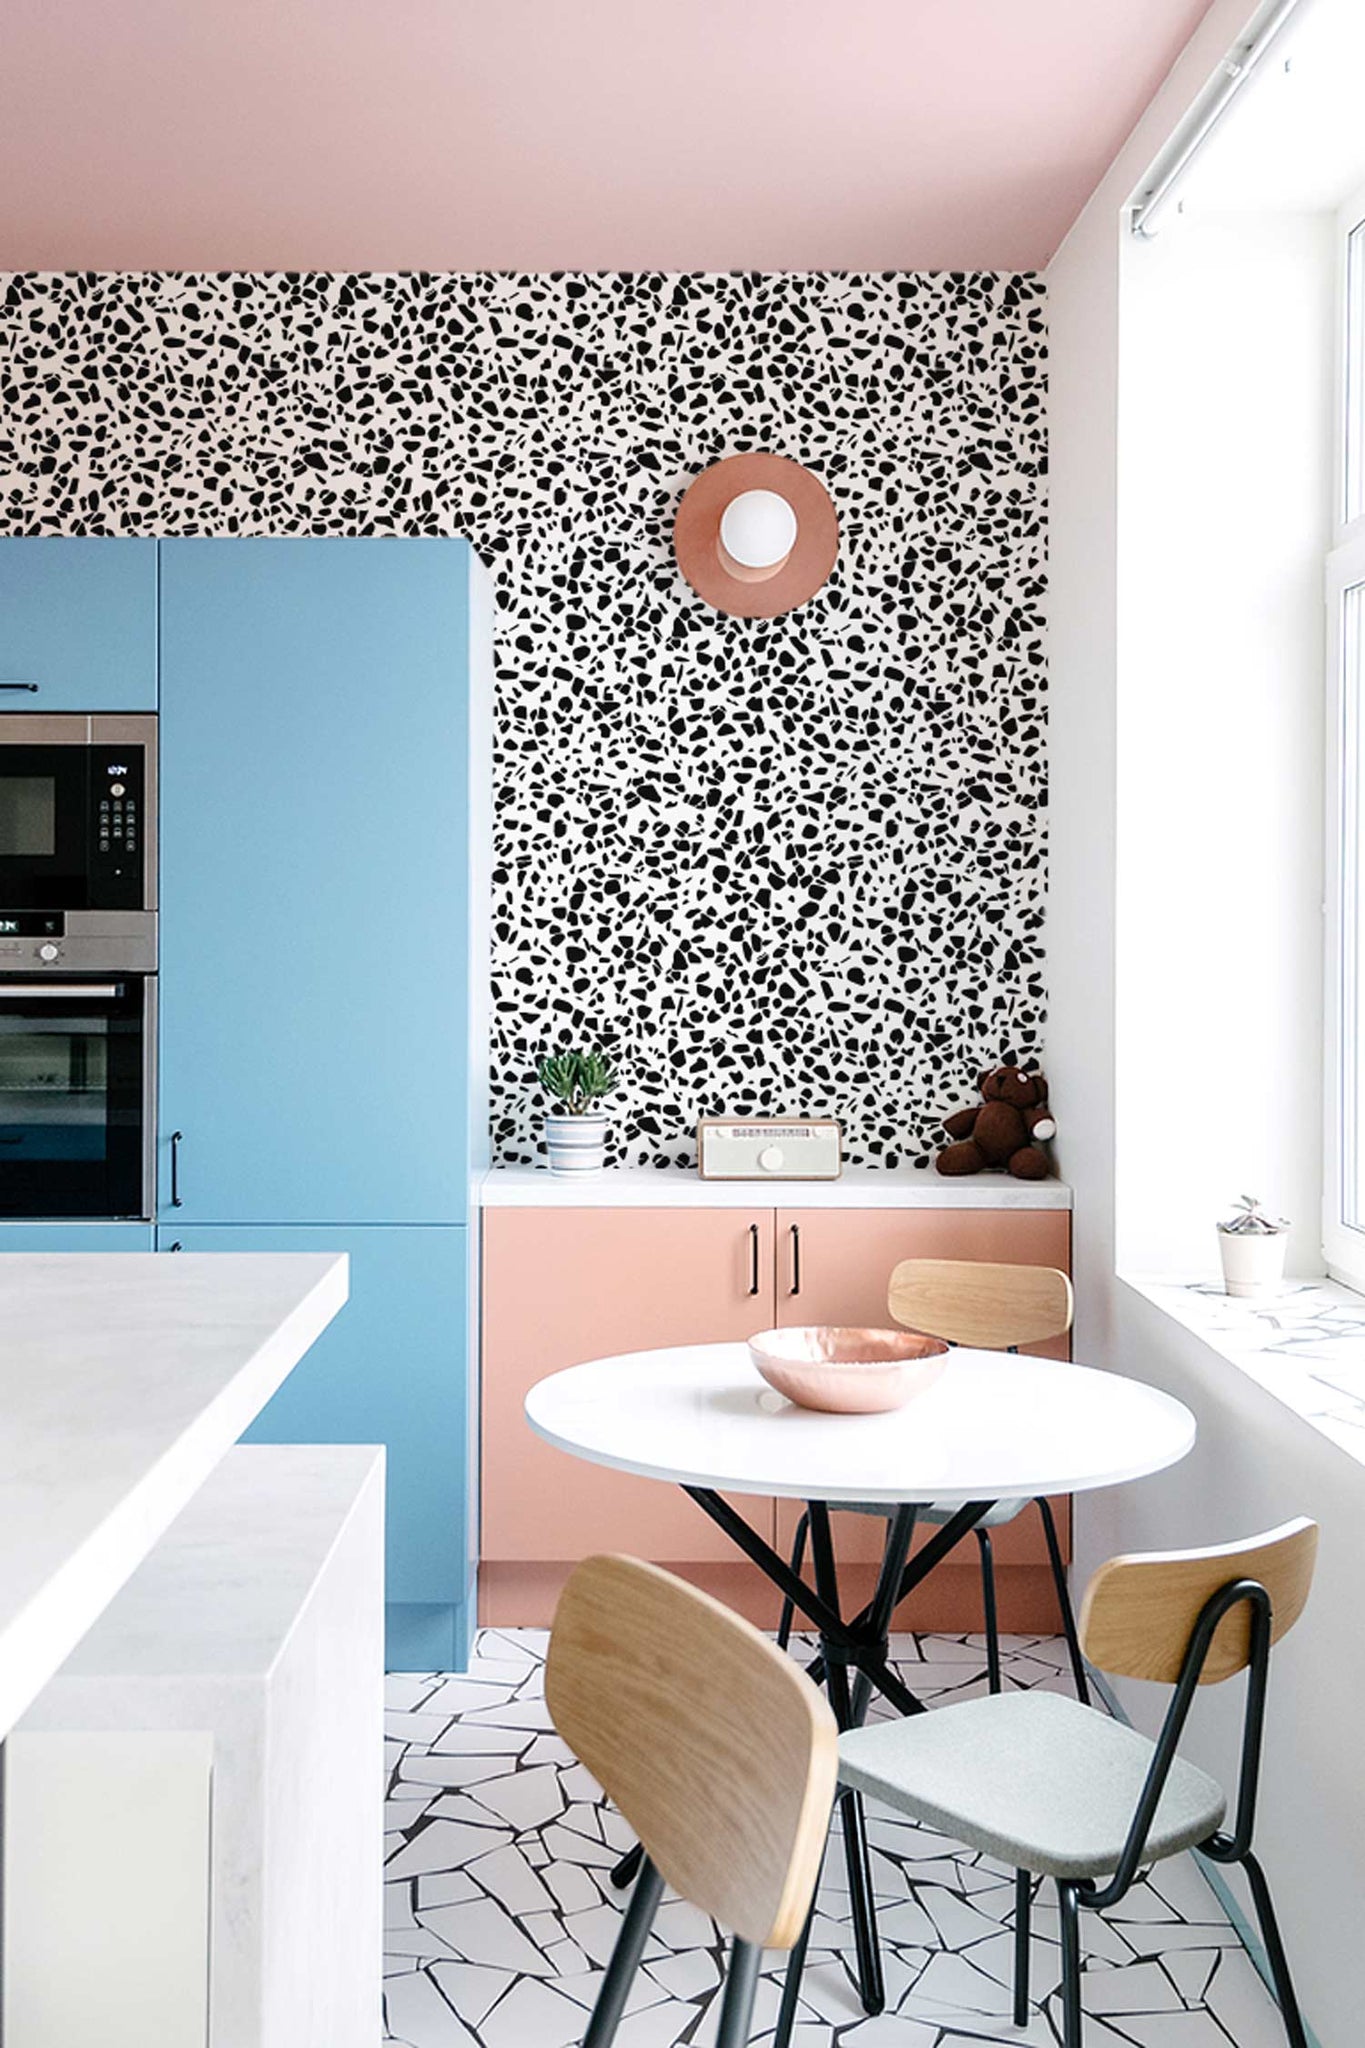 eclectic summer fashion trends of 2022 styled in home interior, eclectic kitchen interior with blue cupboards and black terrazzo floor, pink walls and black terrazzo design removable wallpaper by livettes wallpaper